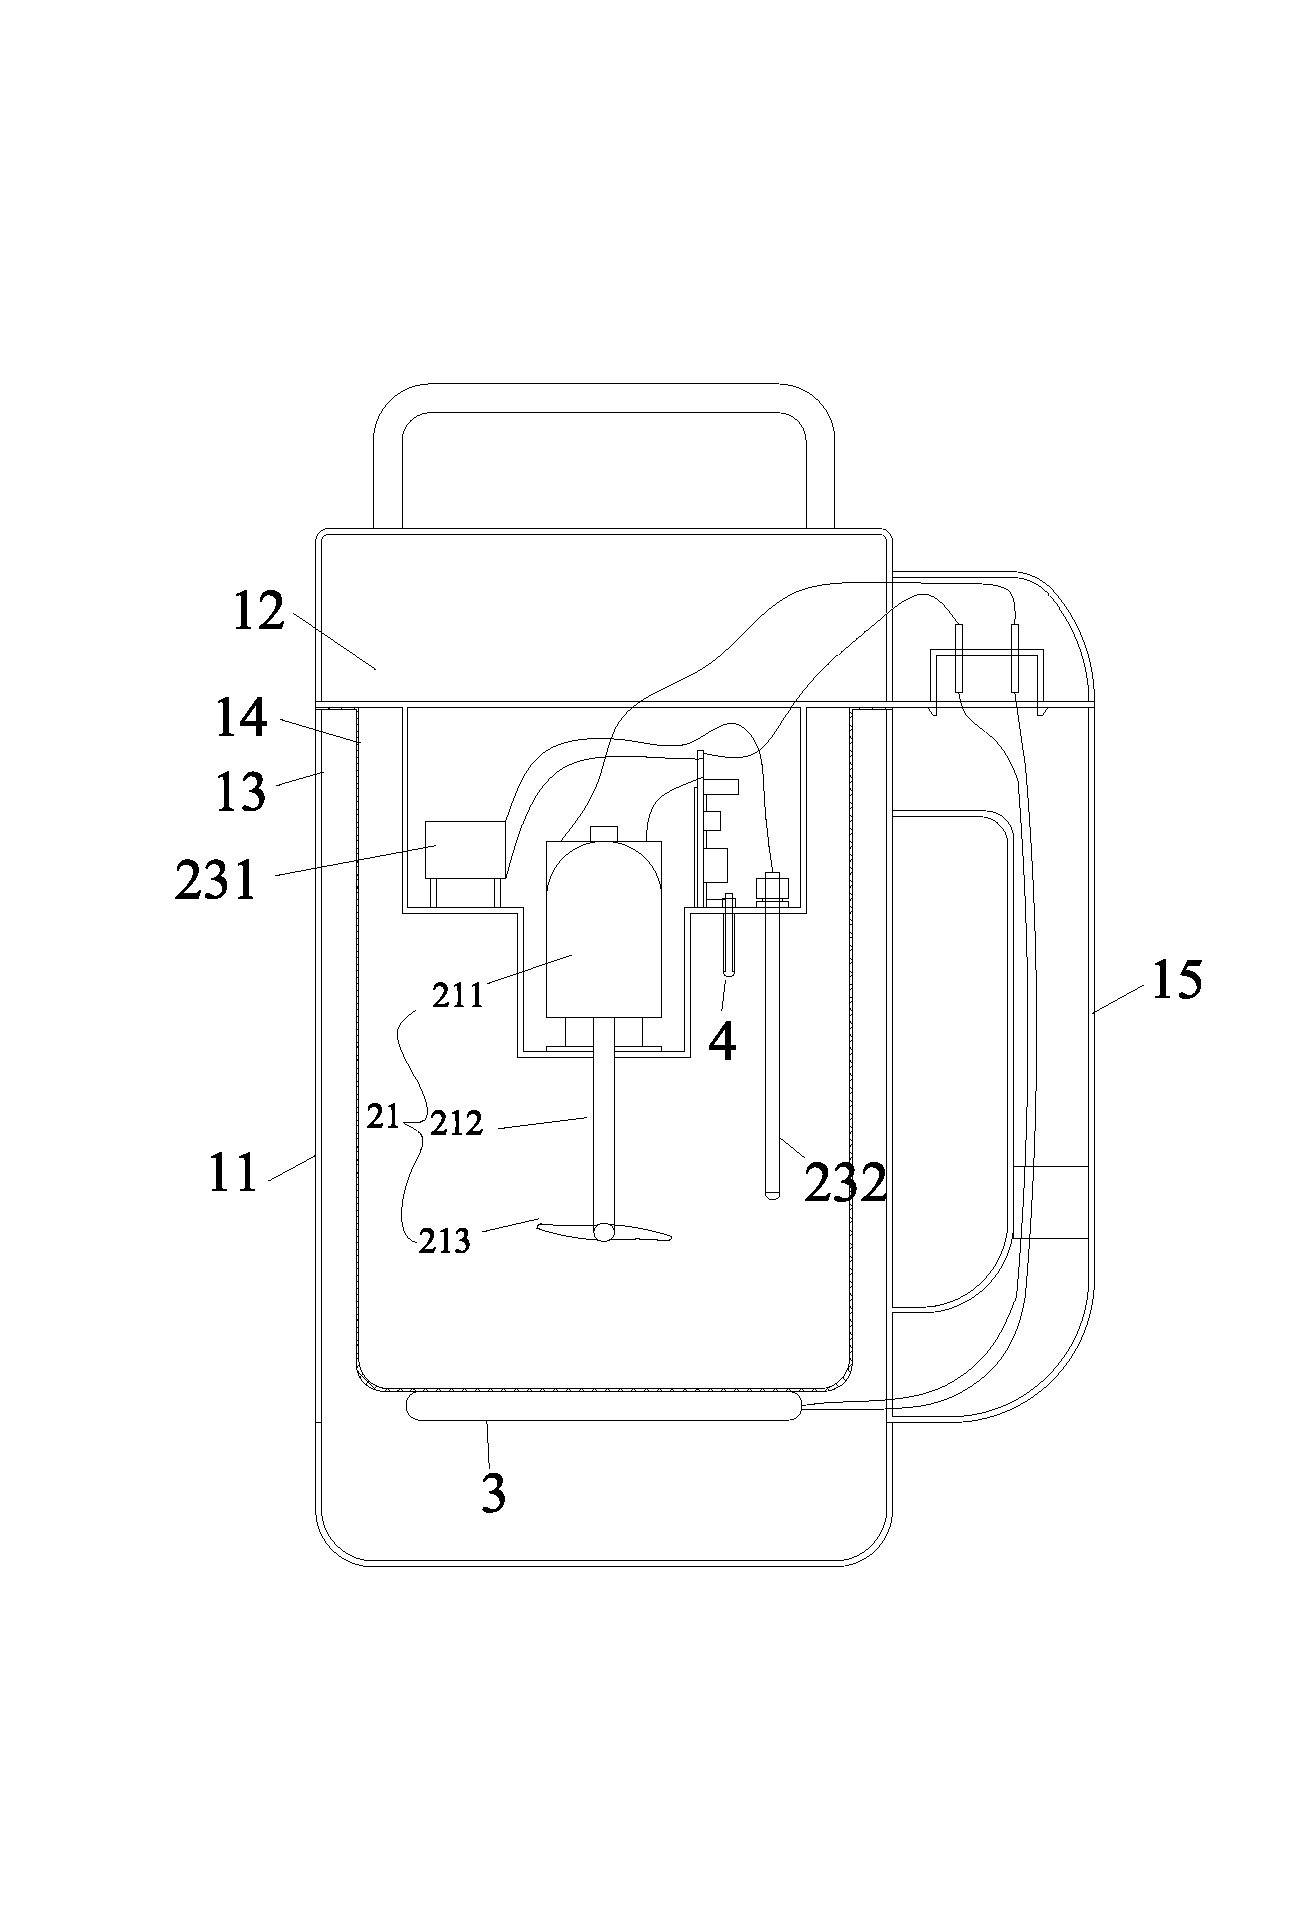 Method for making soybean milk with soybean milk machine and the soybean milk machine